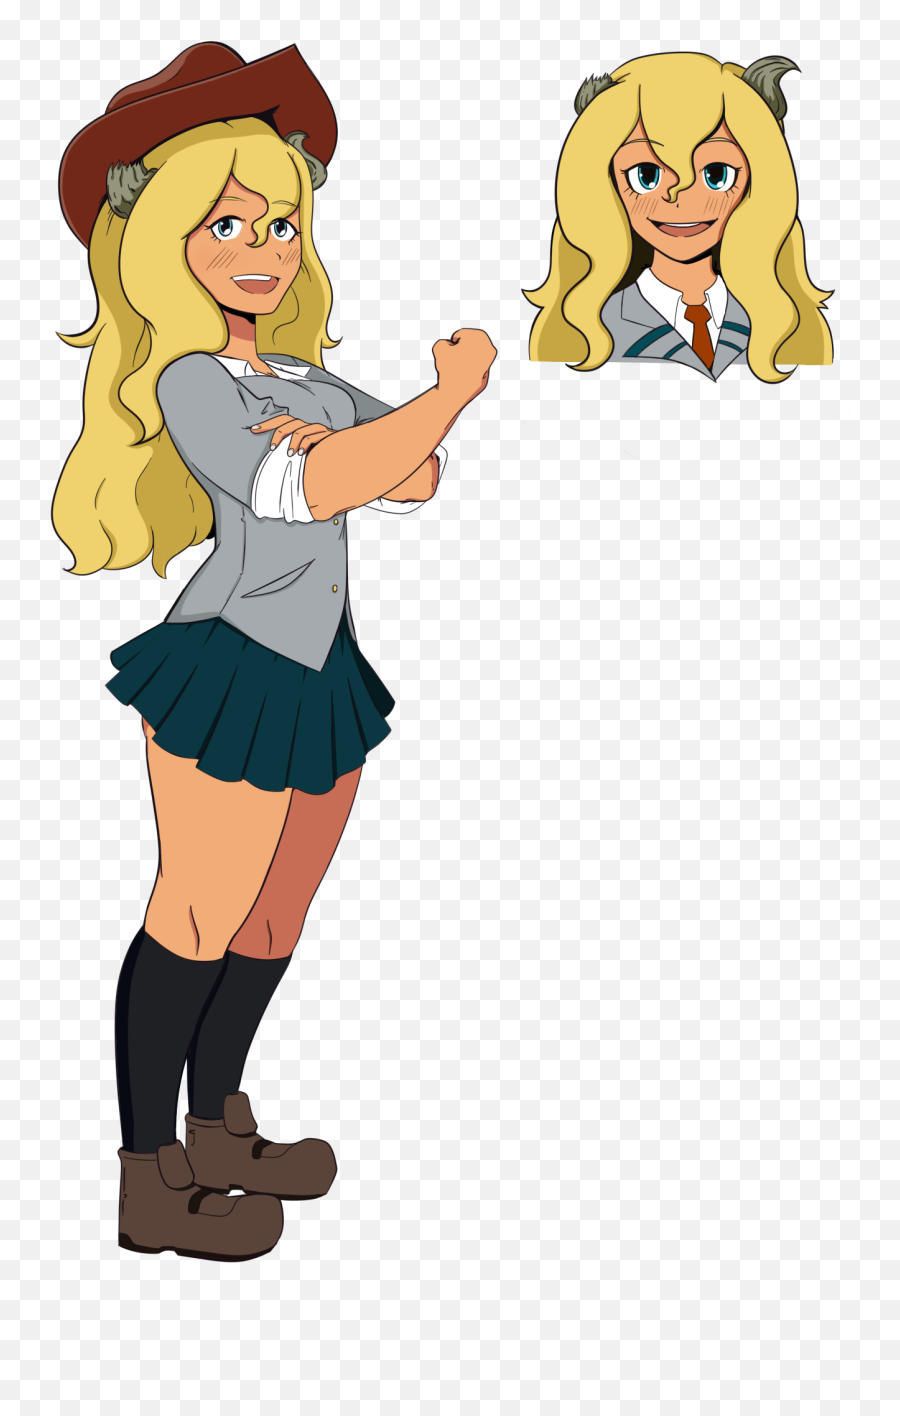 Qst - Quests For Women Emoji,Piank Girl With Super Emotions